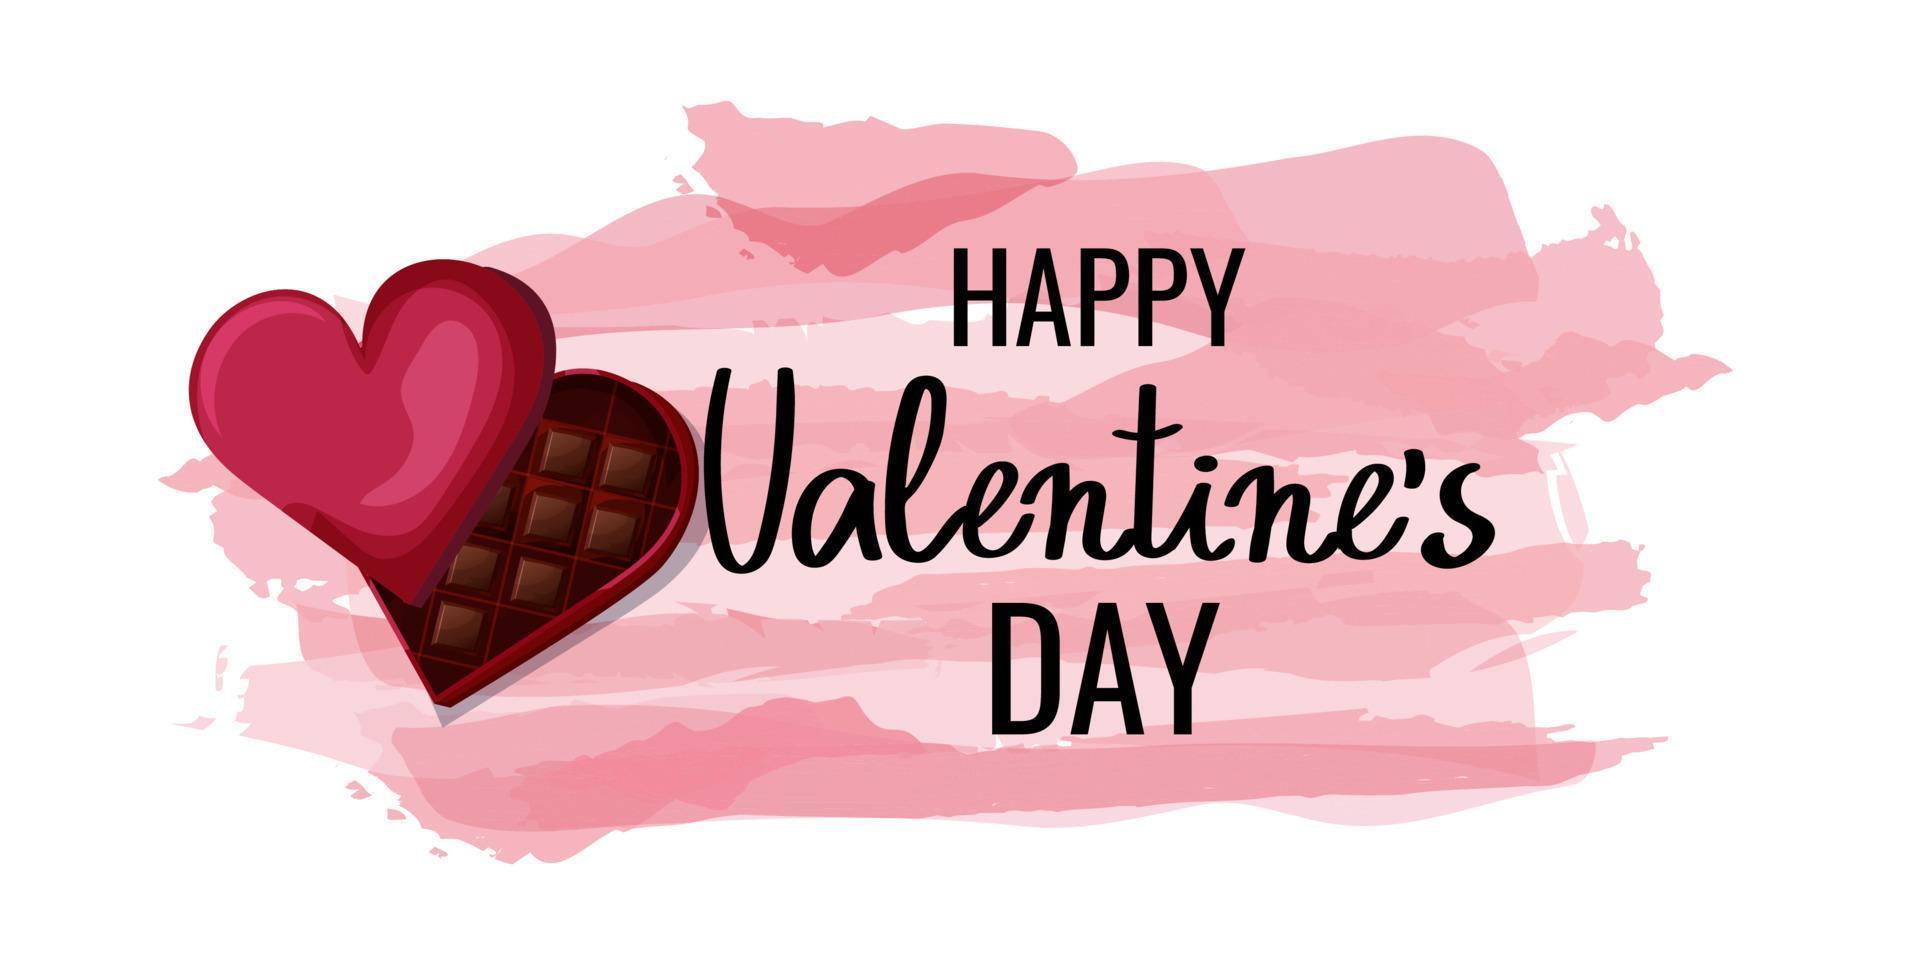 St. Valentine's Day. template for banner, postcard, advertising, on a white background with roses, chocolate, watercolor. vector illustration